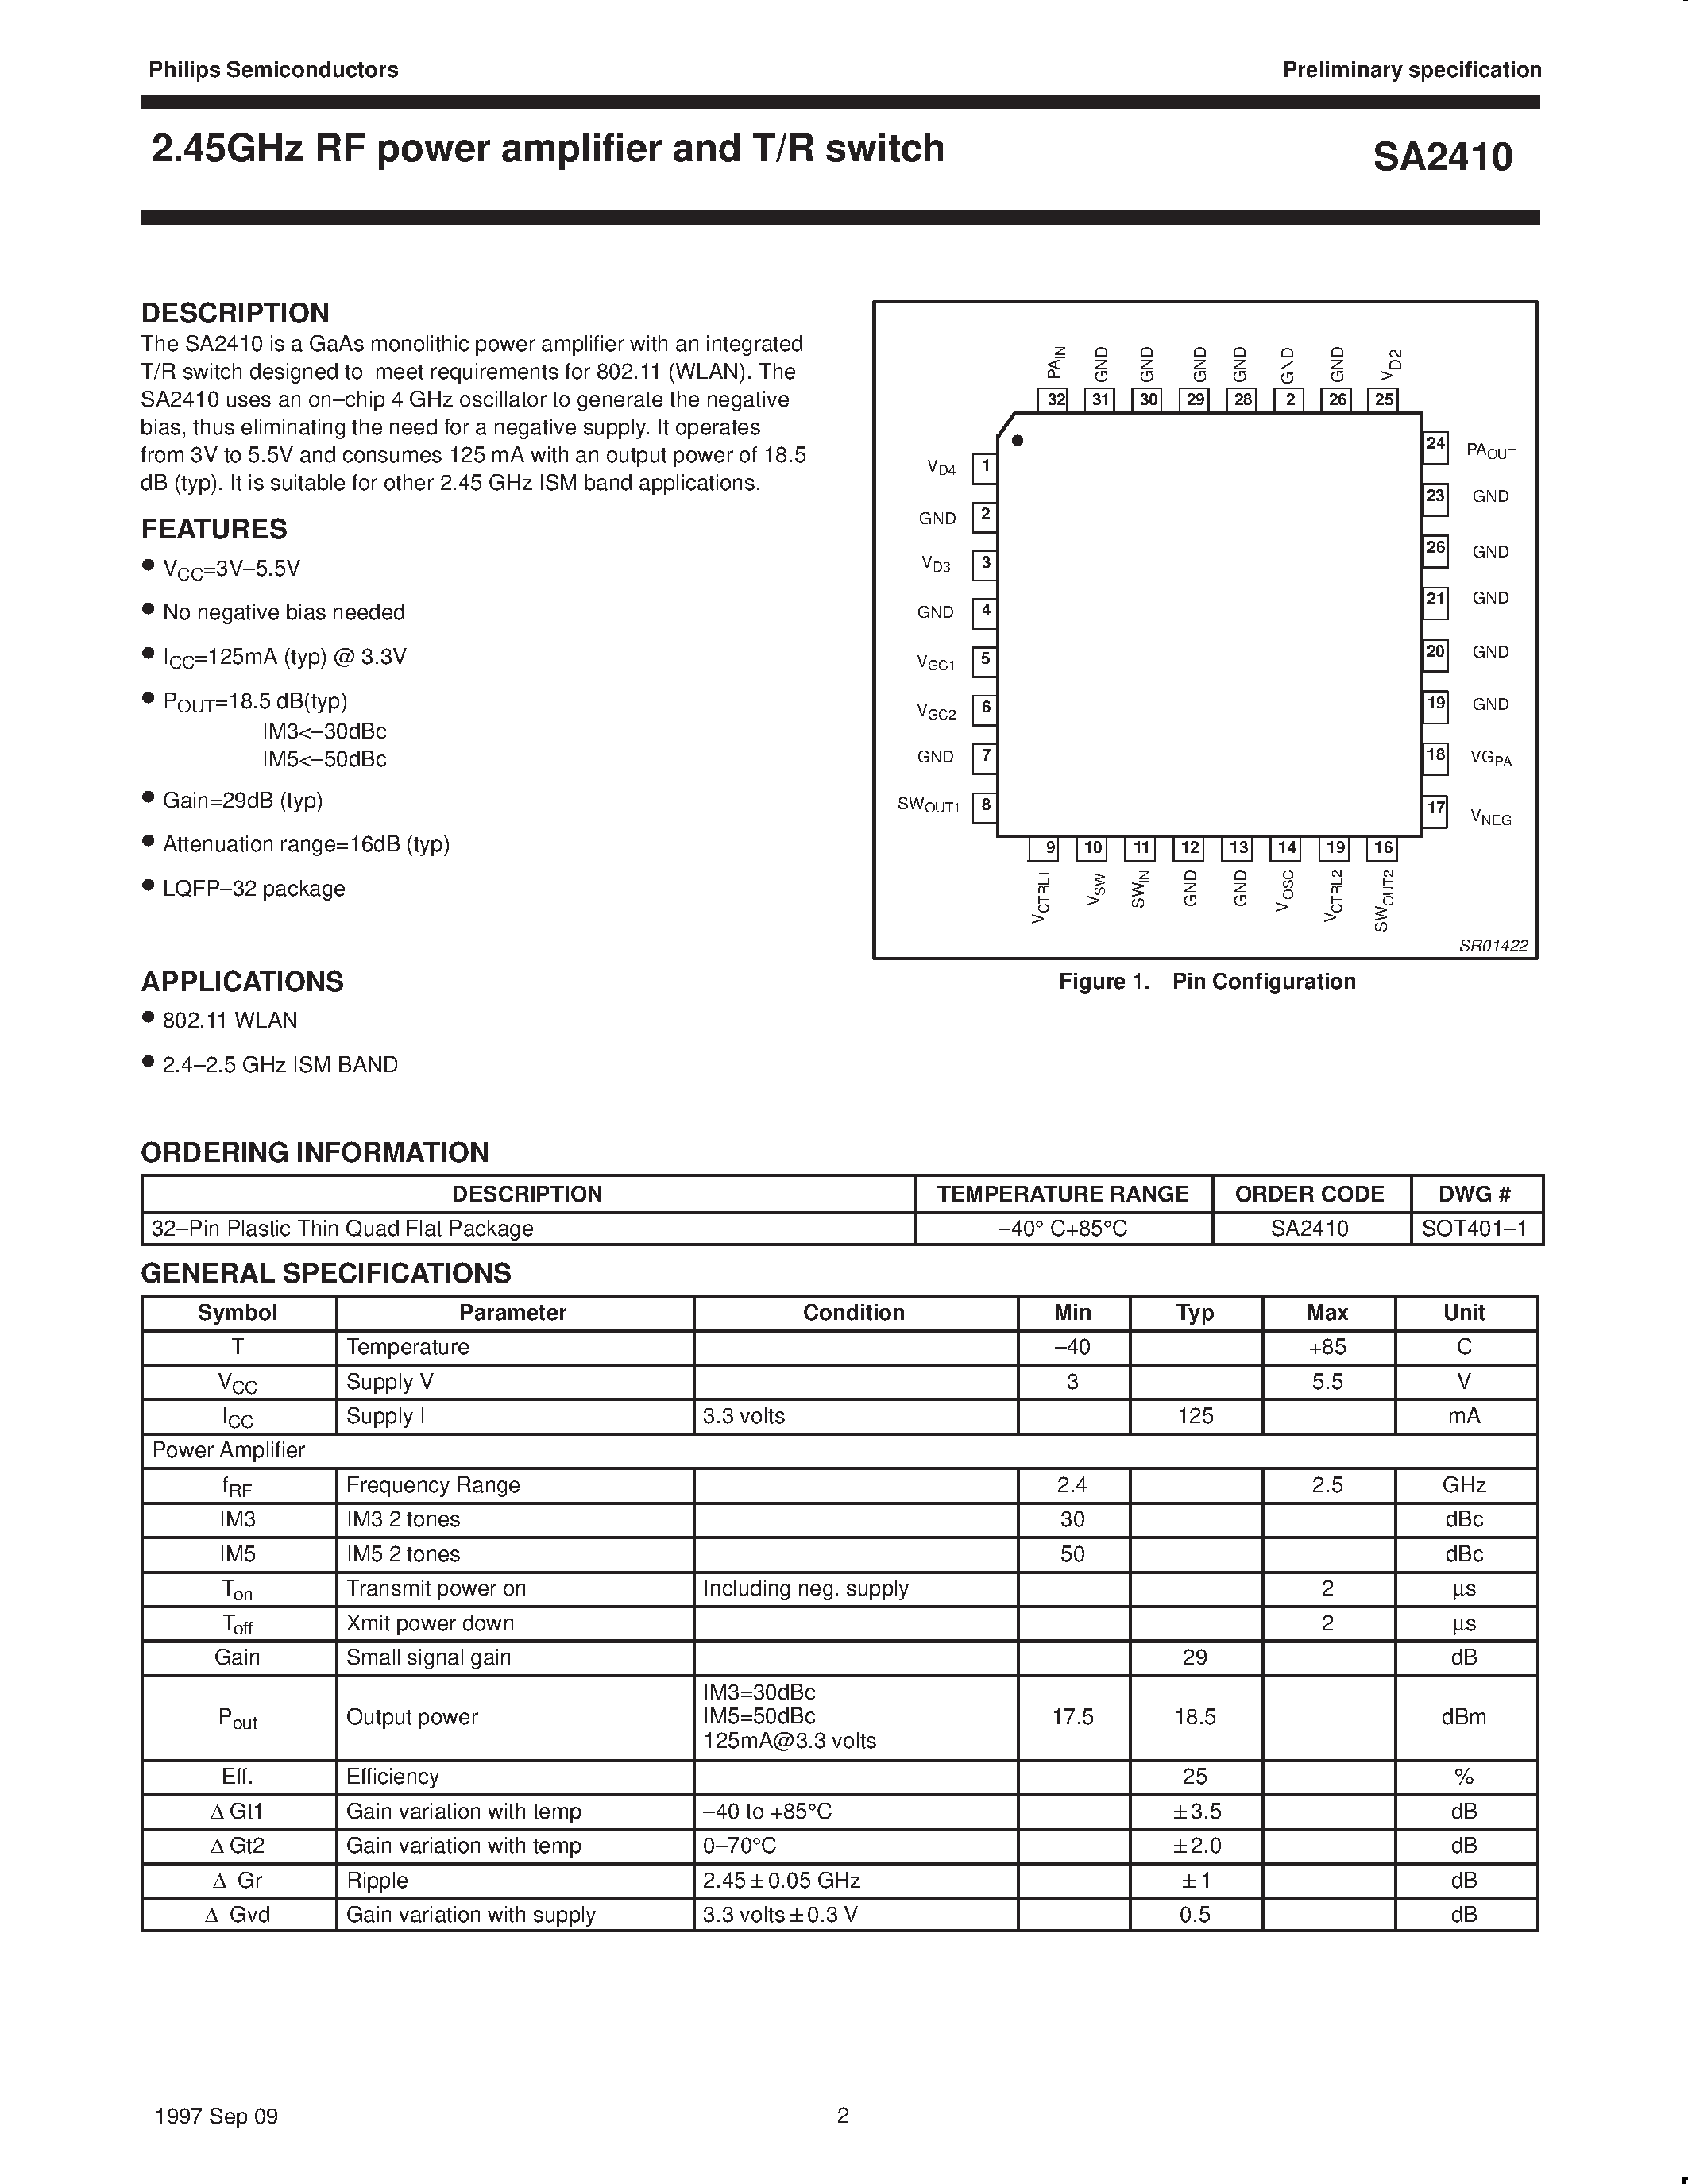 Datasheet SA2410 - 2.45GHz RF power amplifier and T/R switch page 2